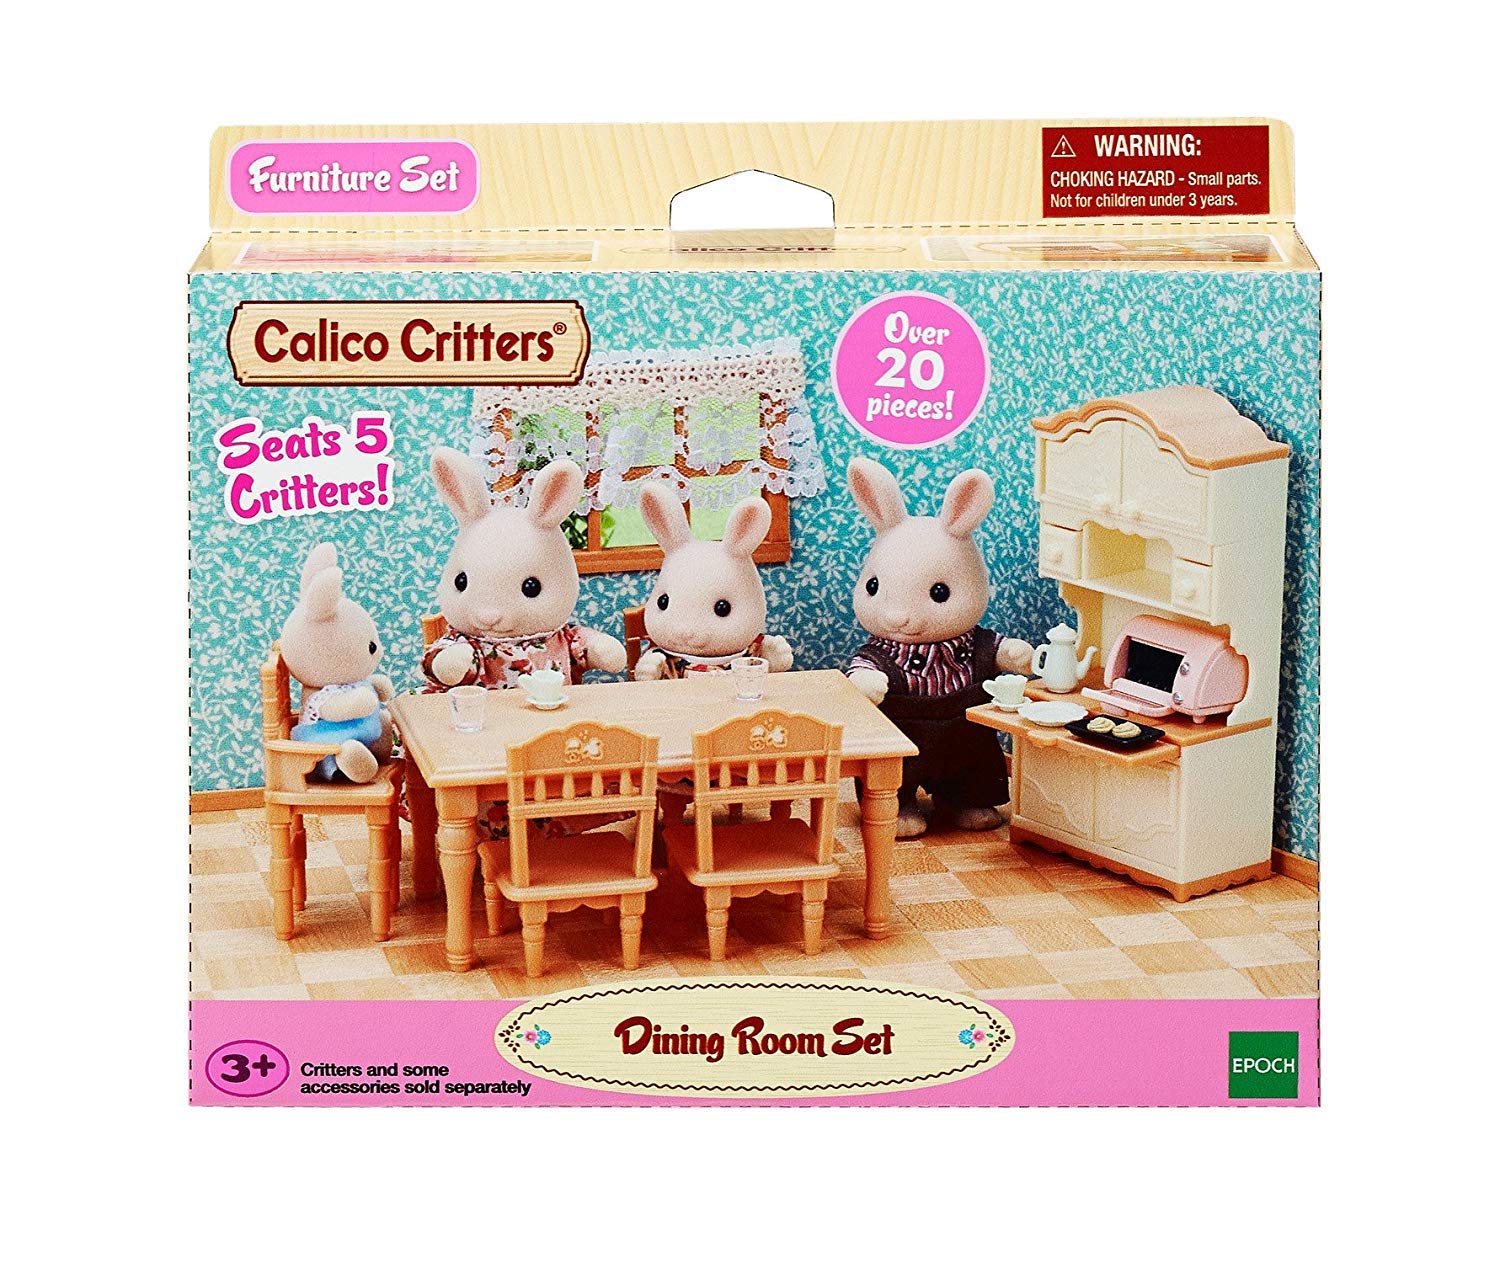 Calico Critters Dining Room Set was $19.95, NOW $10.99! - Become a